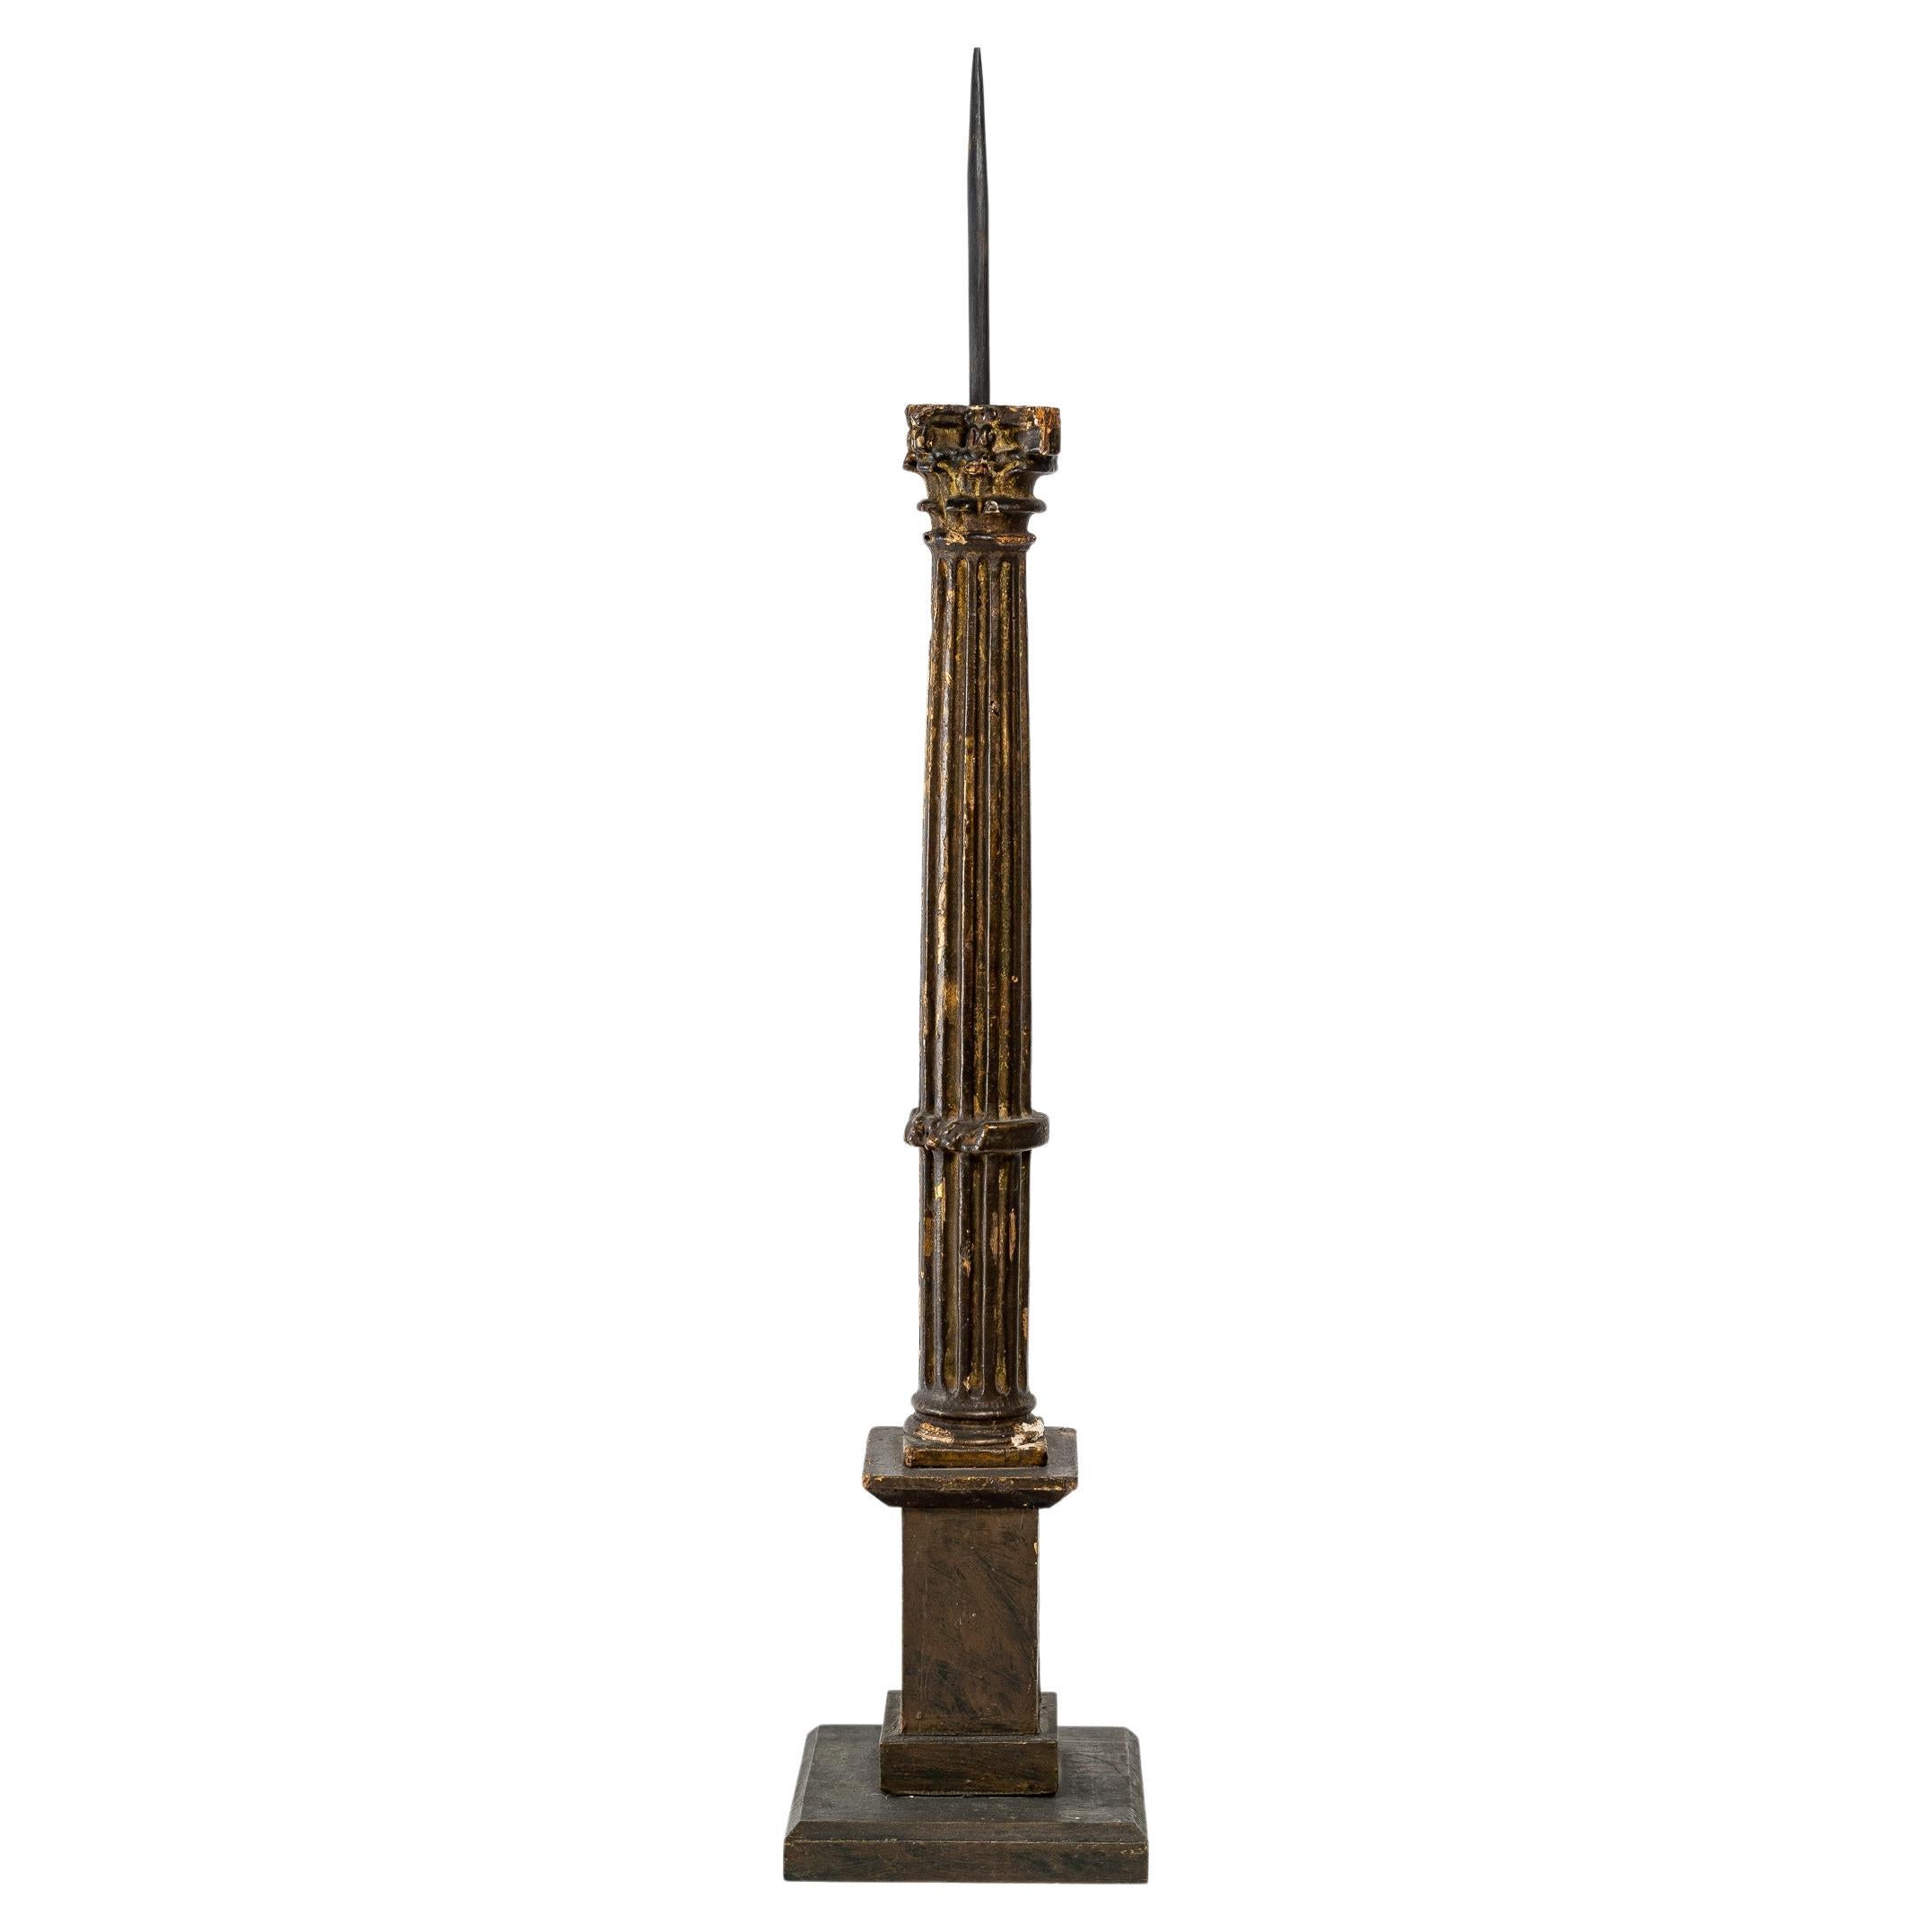 Carved and Gilded Wood Candle Stick, 19th Century